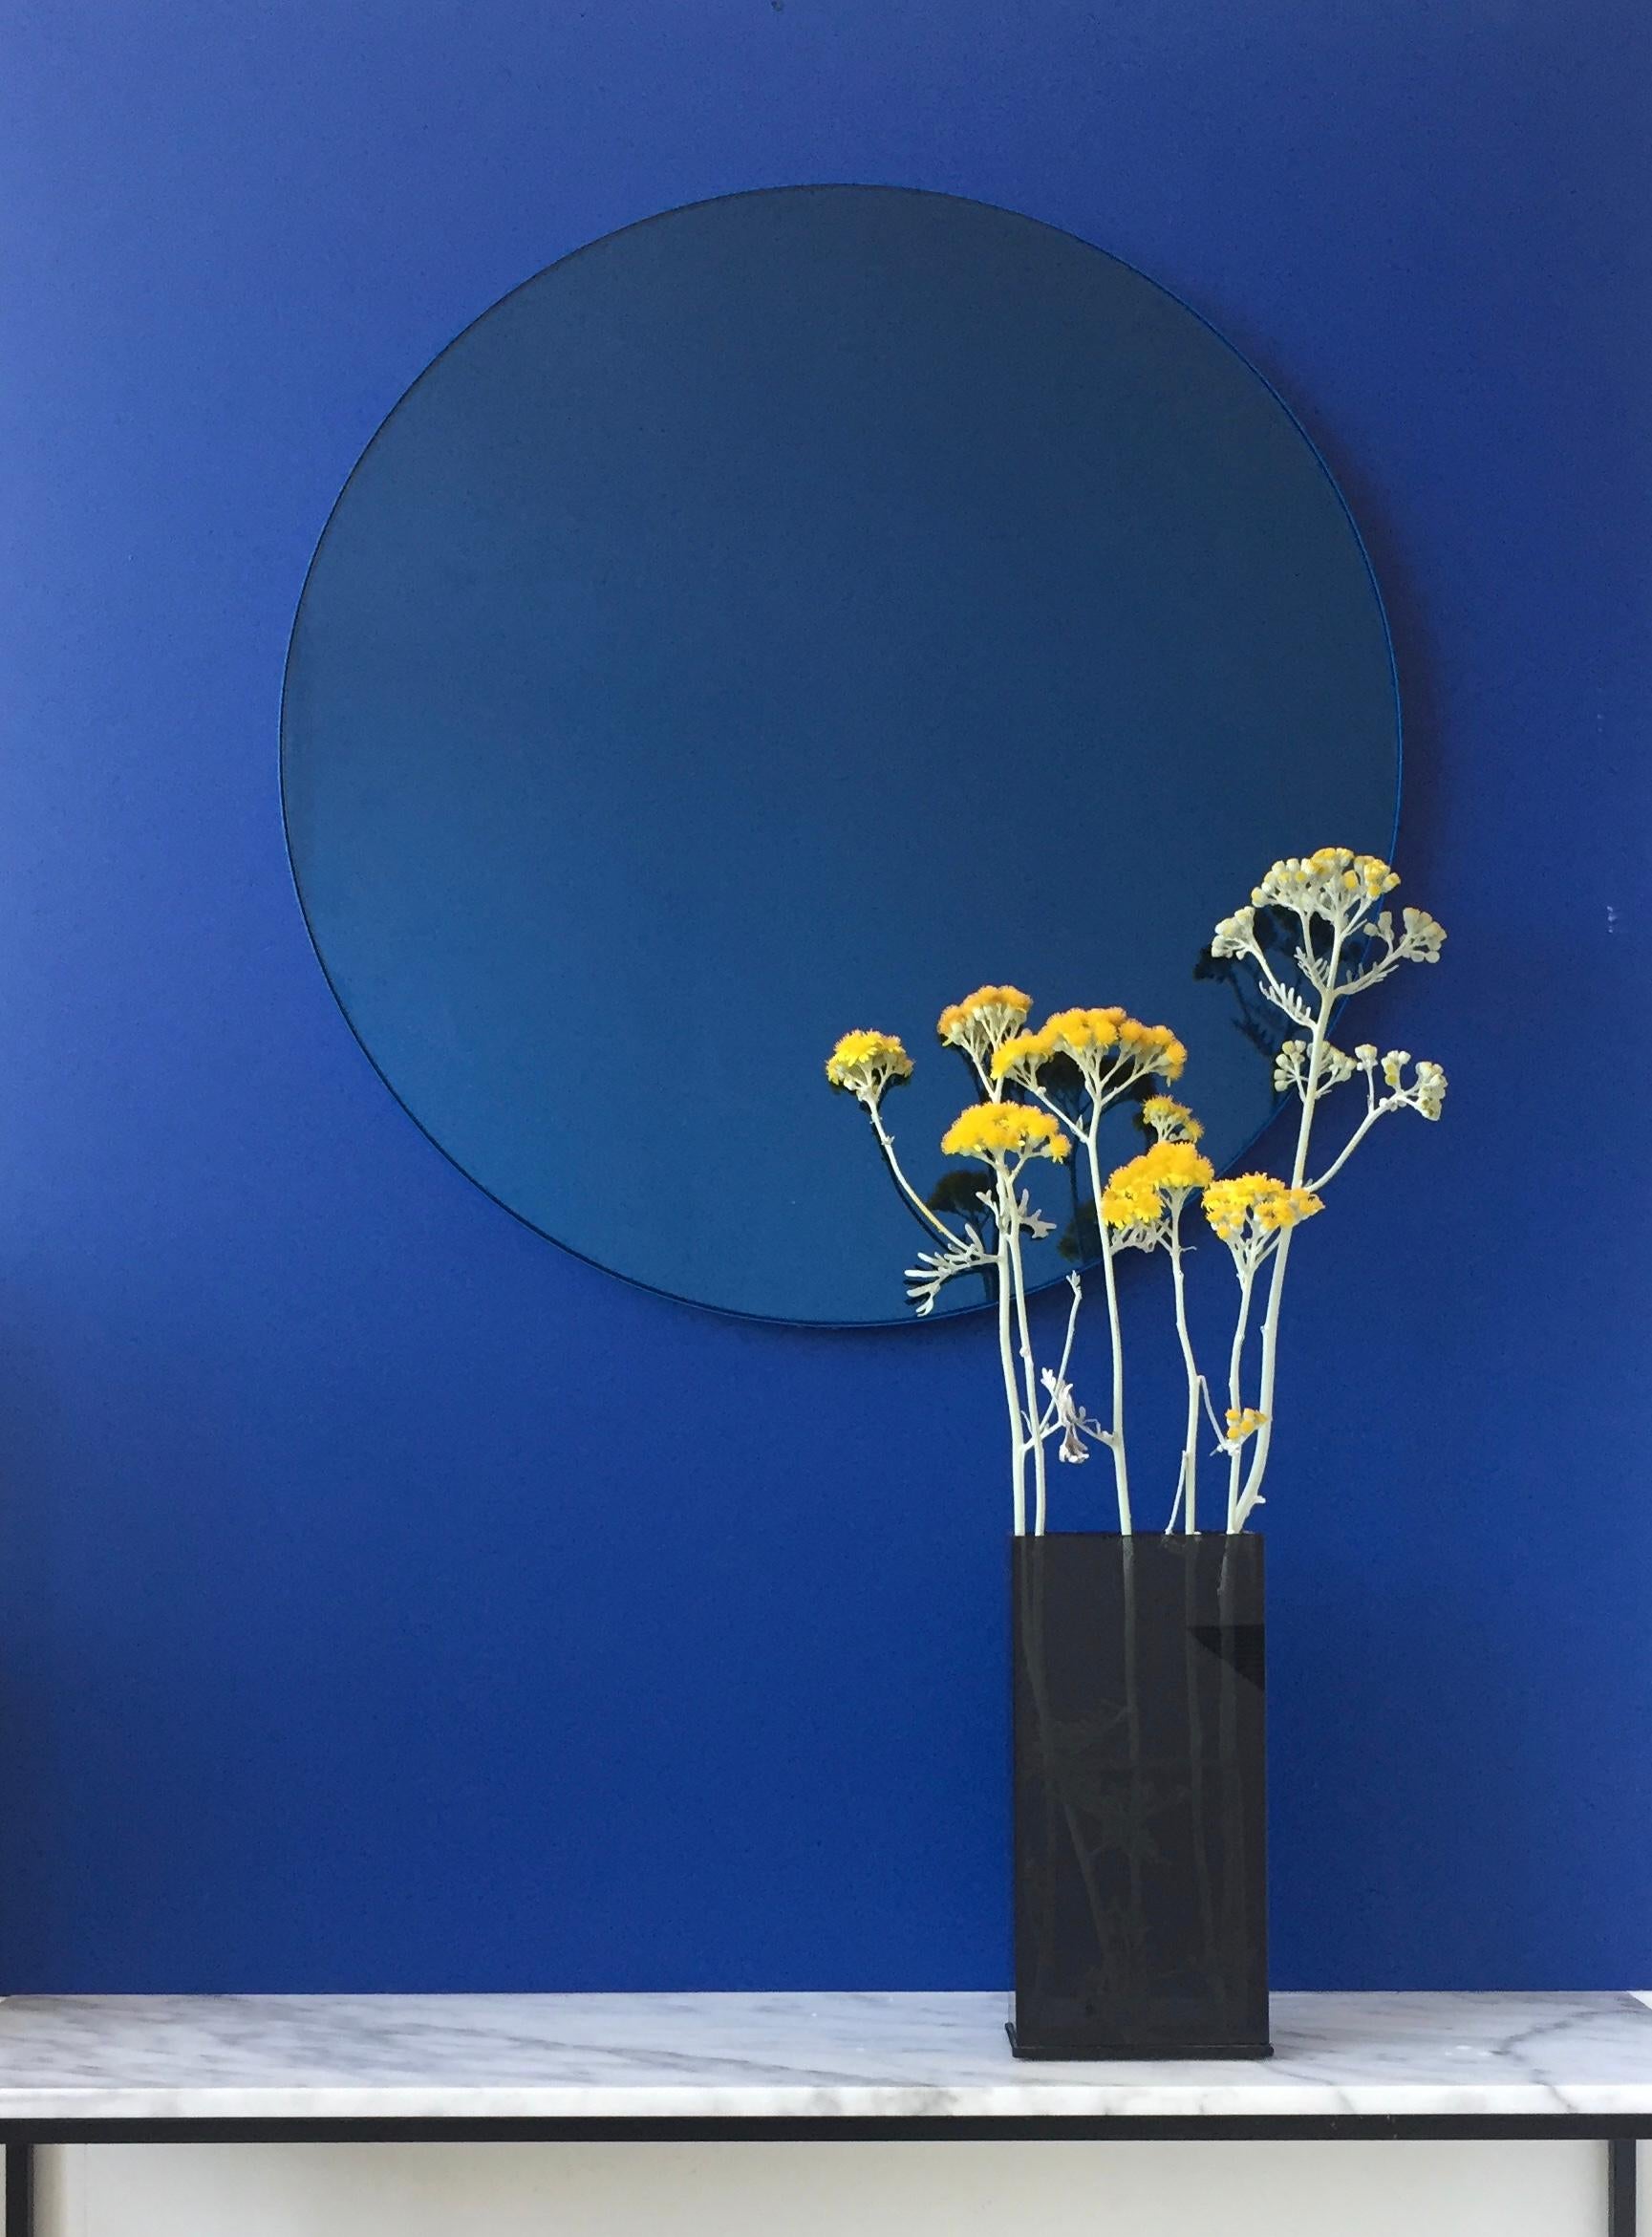 British Orbis Blue Tinted Round Mirror with a Modern Blue Frame, Small For Sale